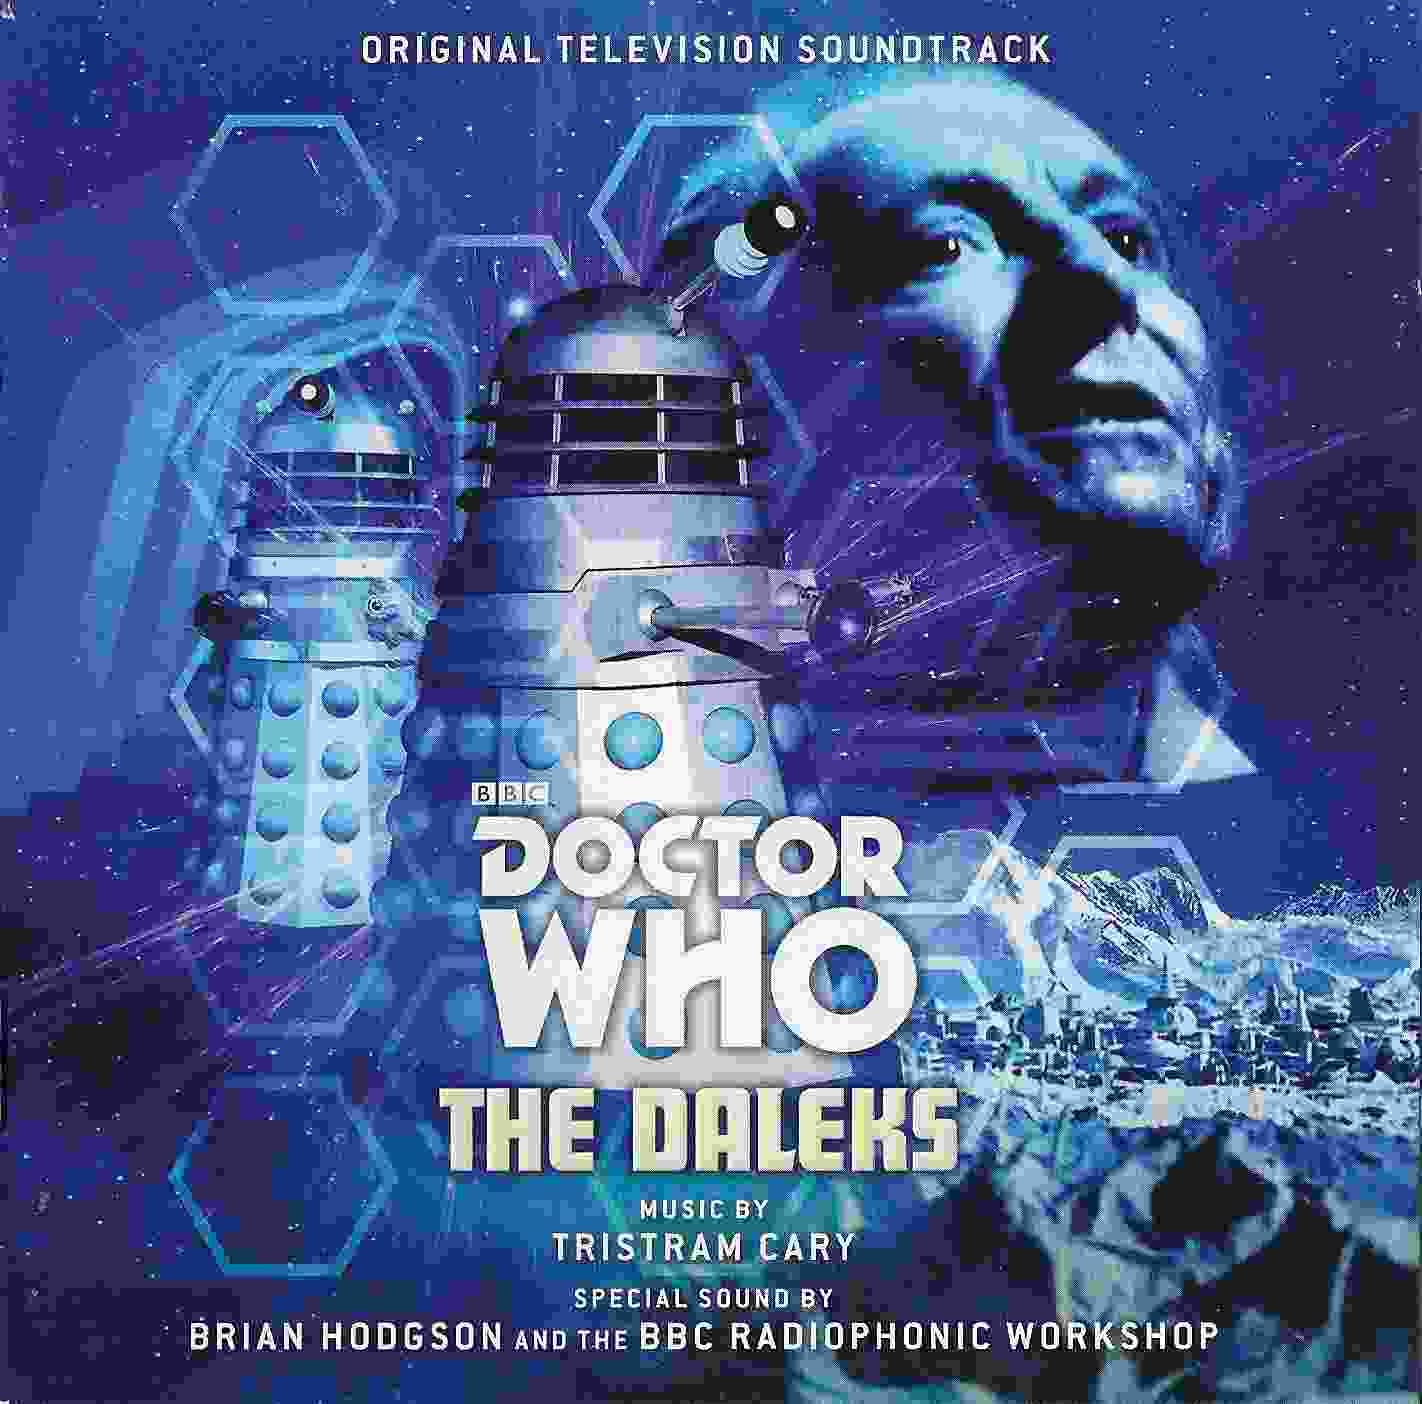 Picture of SILCD 1536 Doctor Who - The Daleks by artist Tristram Cary from the BBC records and Tapes library